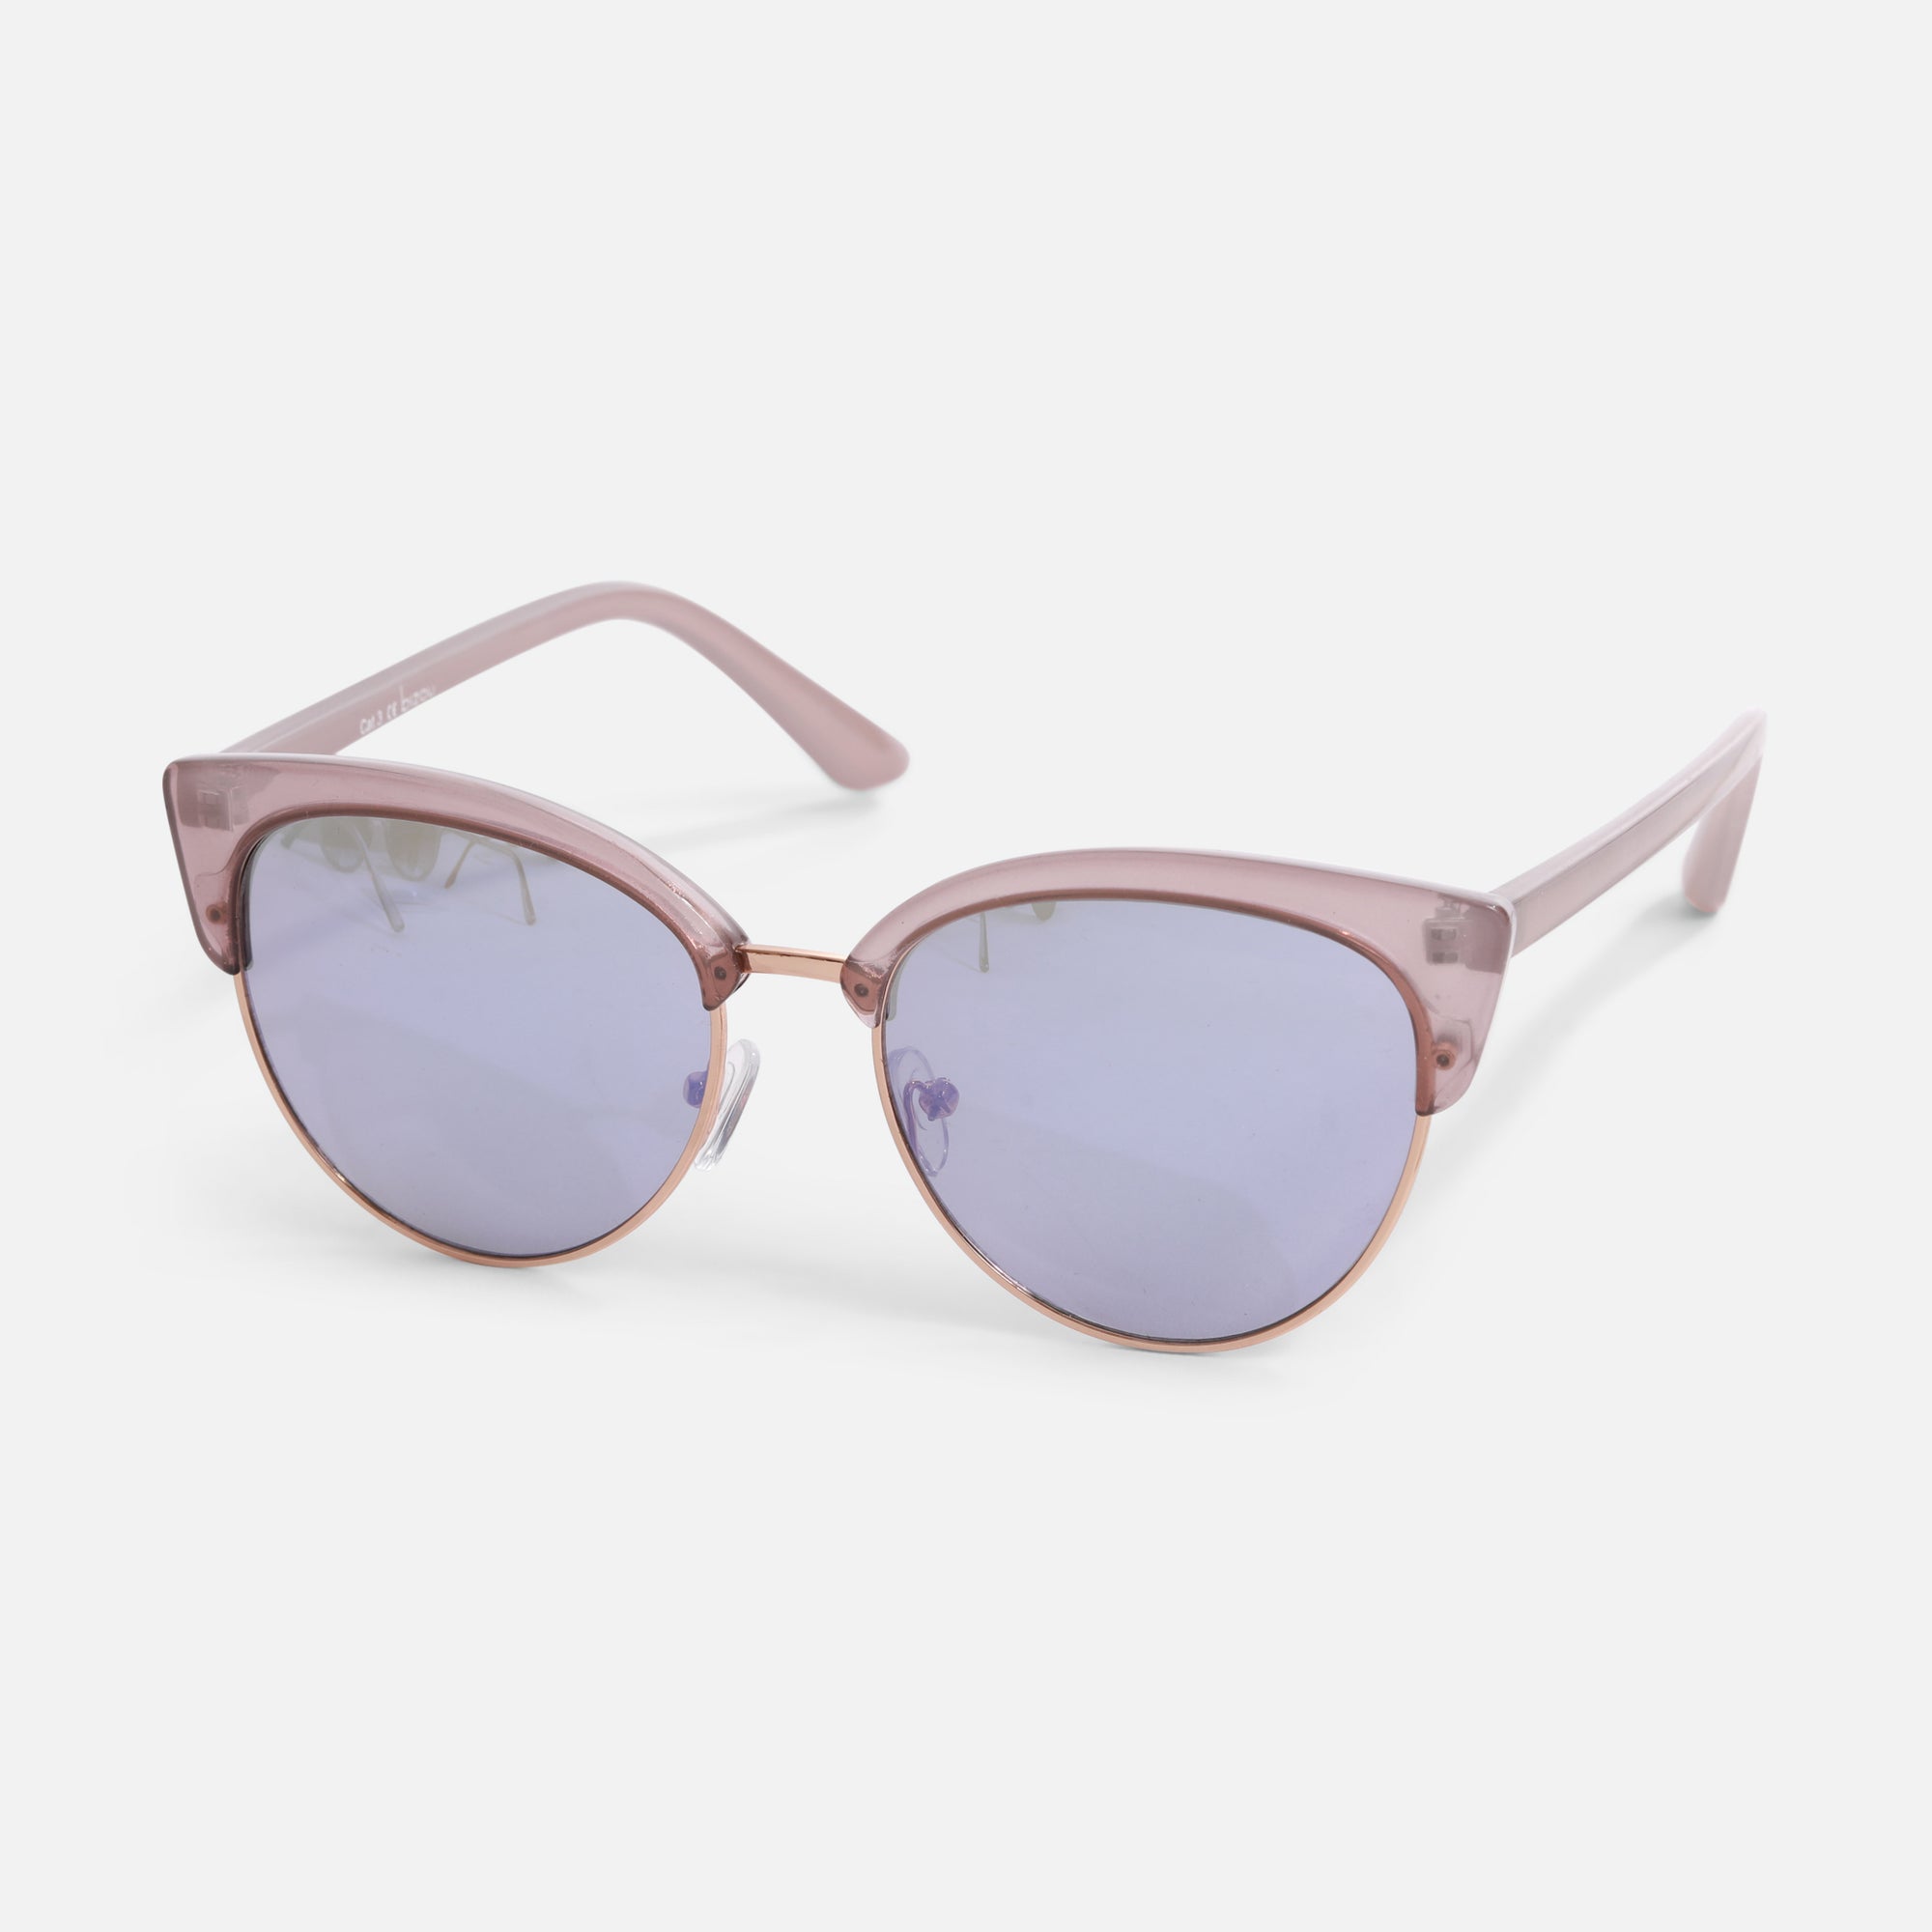 Clubmaster style sunglasses with purple lenses and frame   